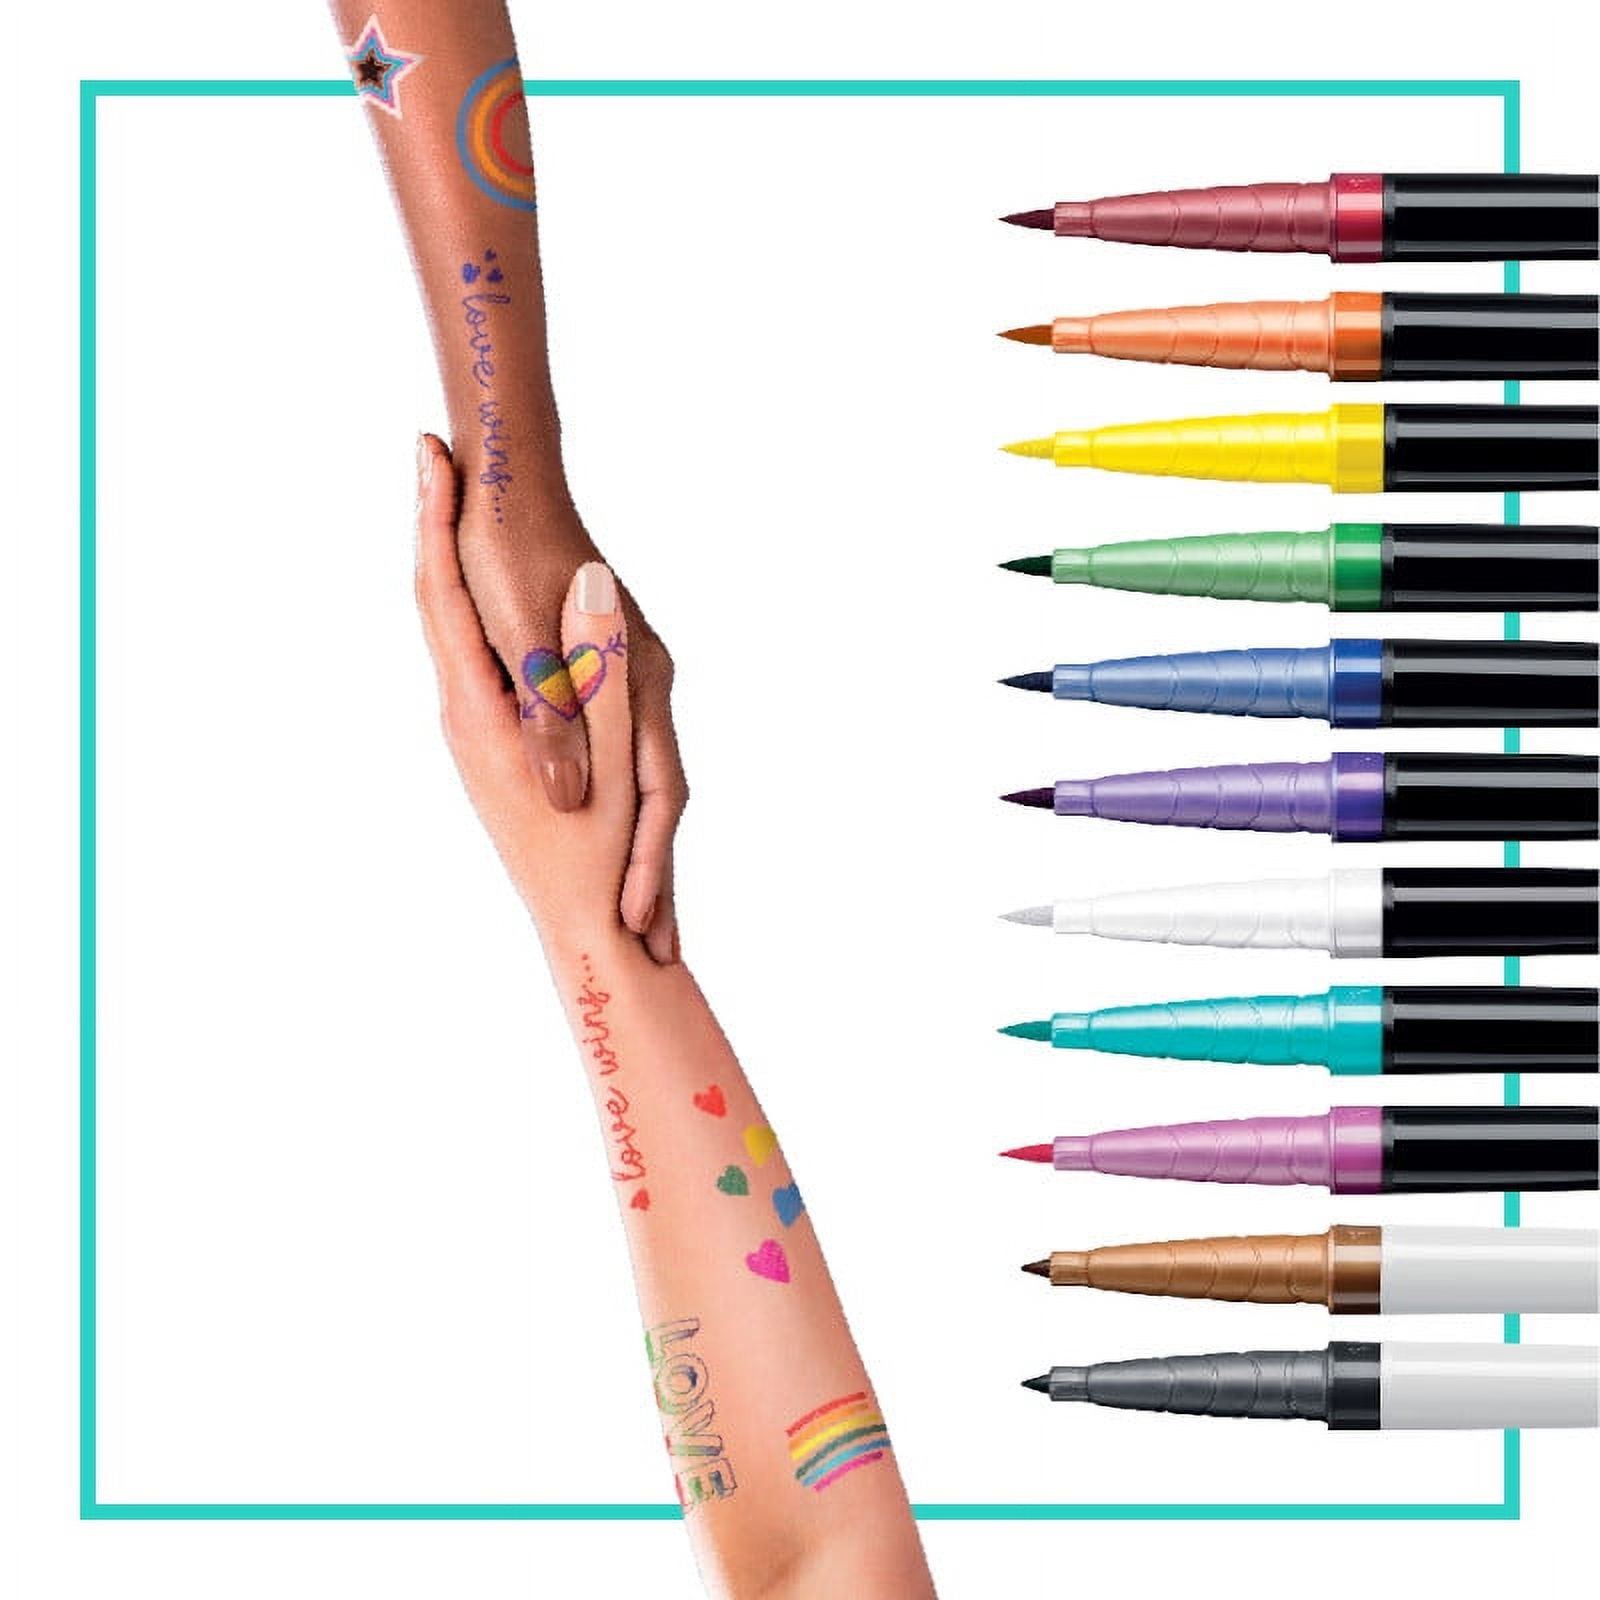 Discover more than 226 tattoo markers super hot